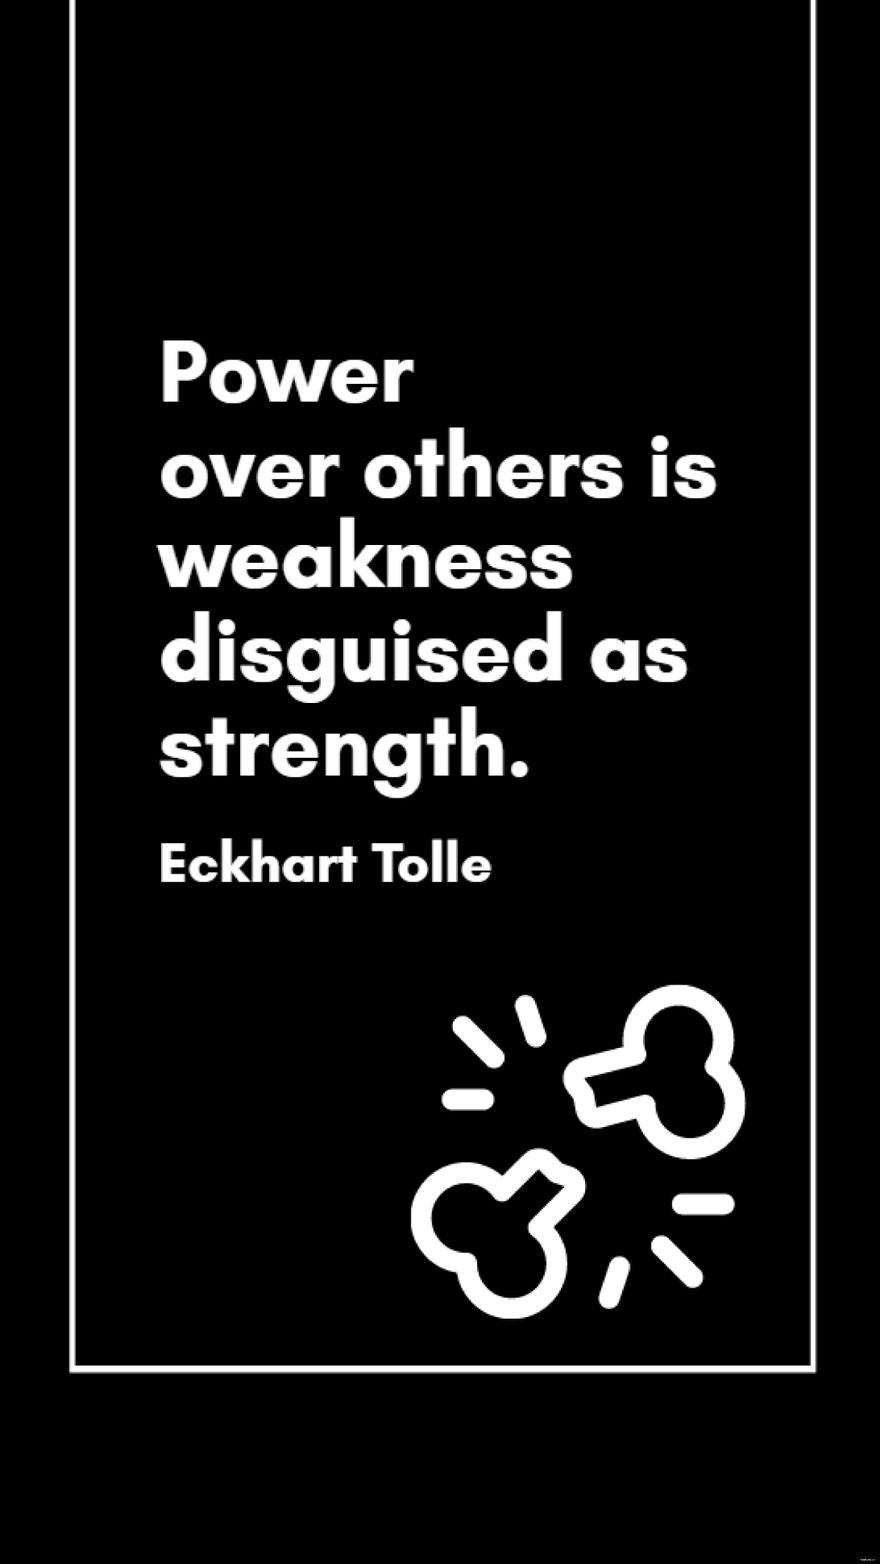 Eckhart Tolle - Power over others is weakness disguised as strength.